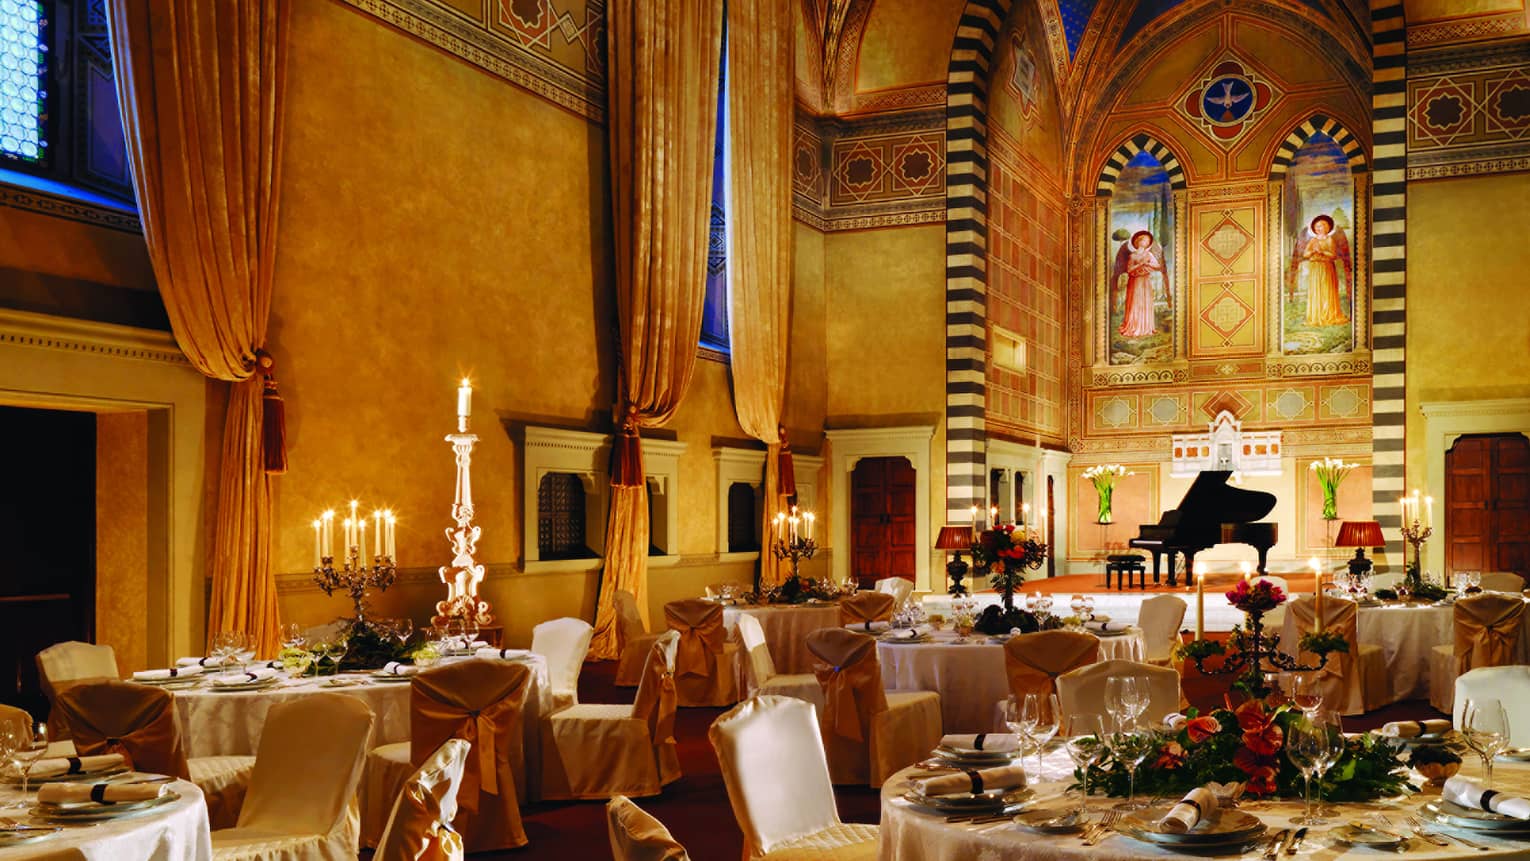 Sweeping arched ceilings over dining tables in La Villa Ballroom